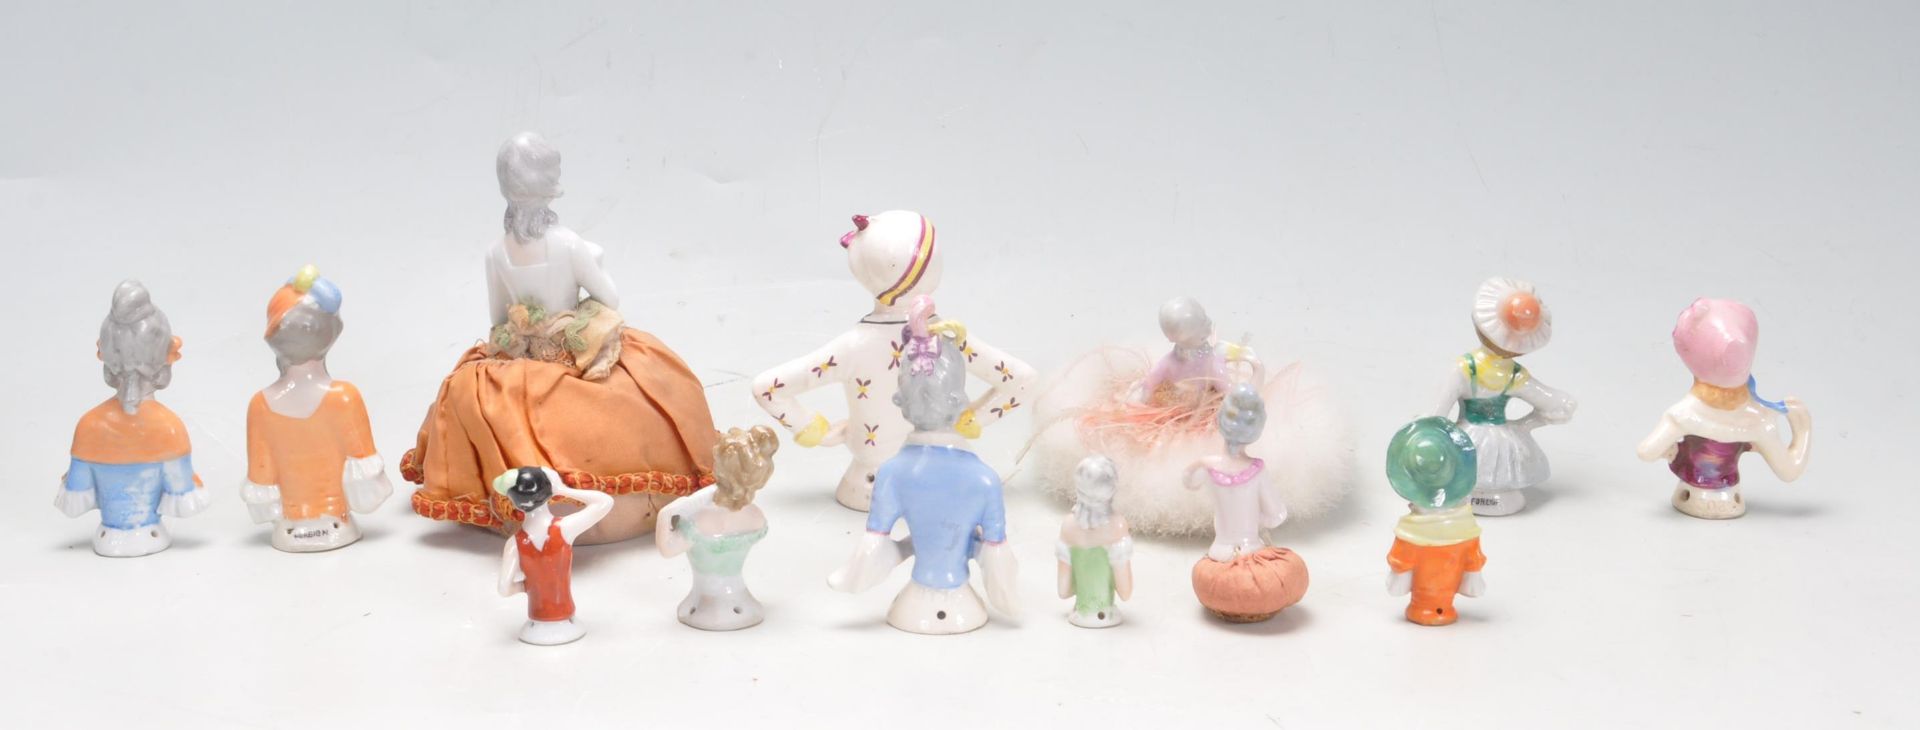 COLLECTION OF 28 PIN CUSHION HALF DOLLS - Image 3 of 4